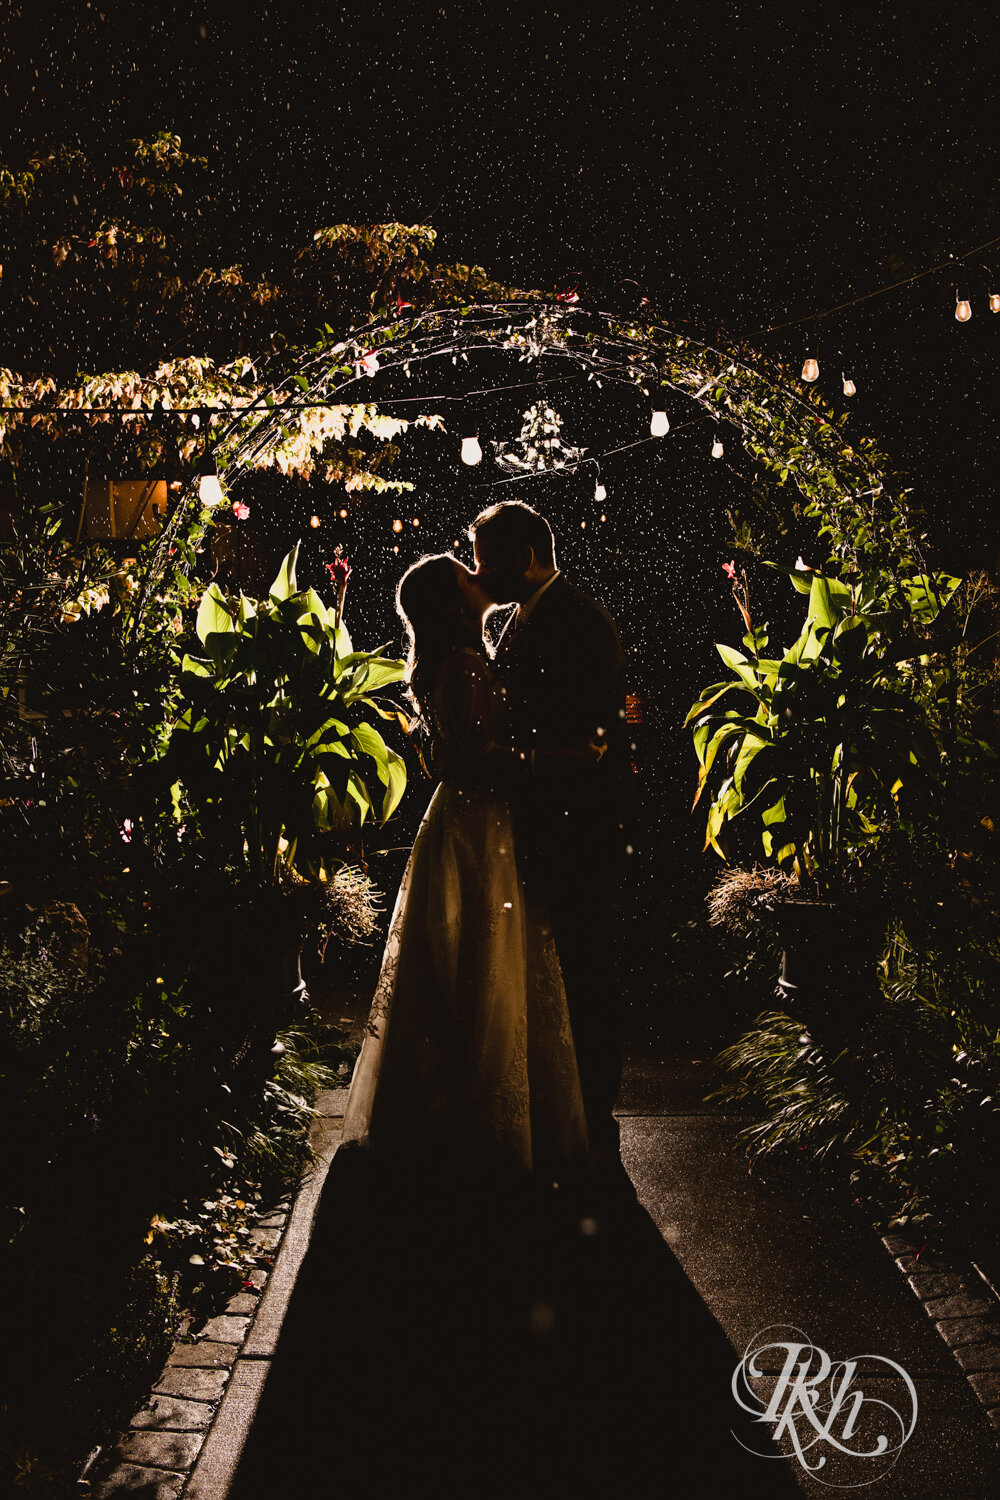 Bride and groom kiss in falling snow at night at Kellerman's Event Center in White Bear Lake, Minnesota.